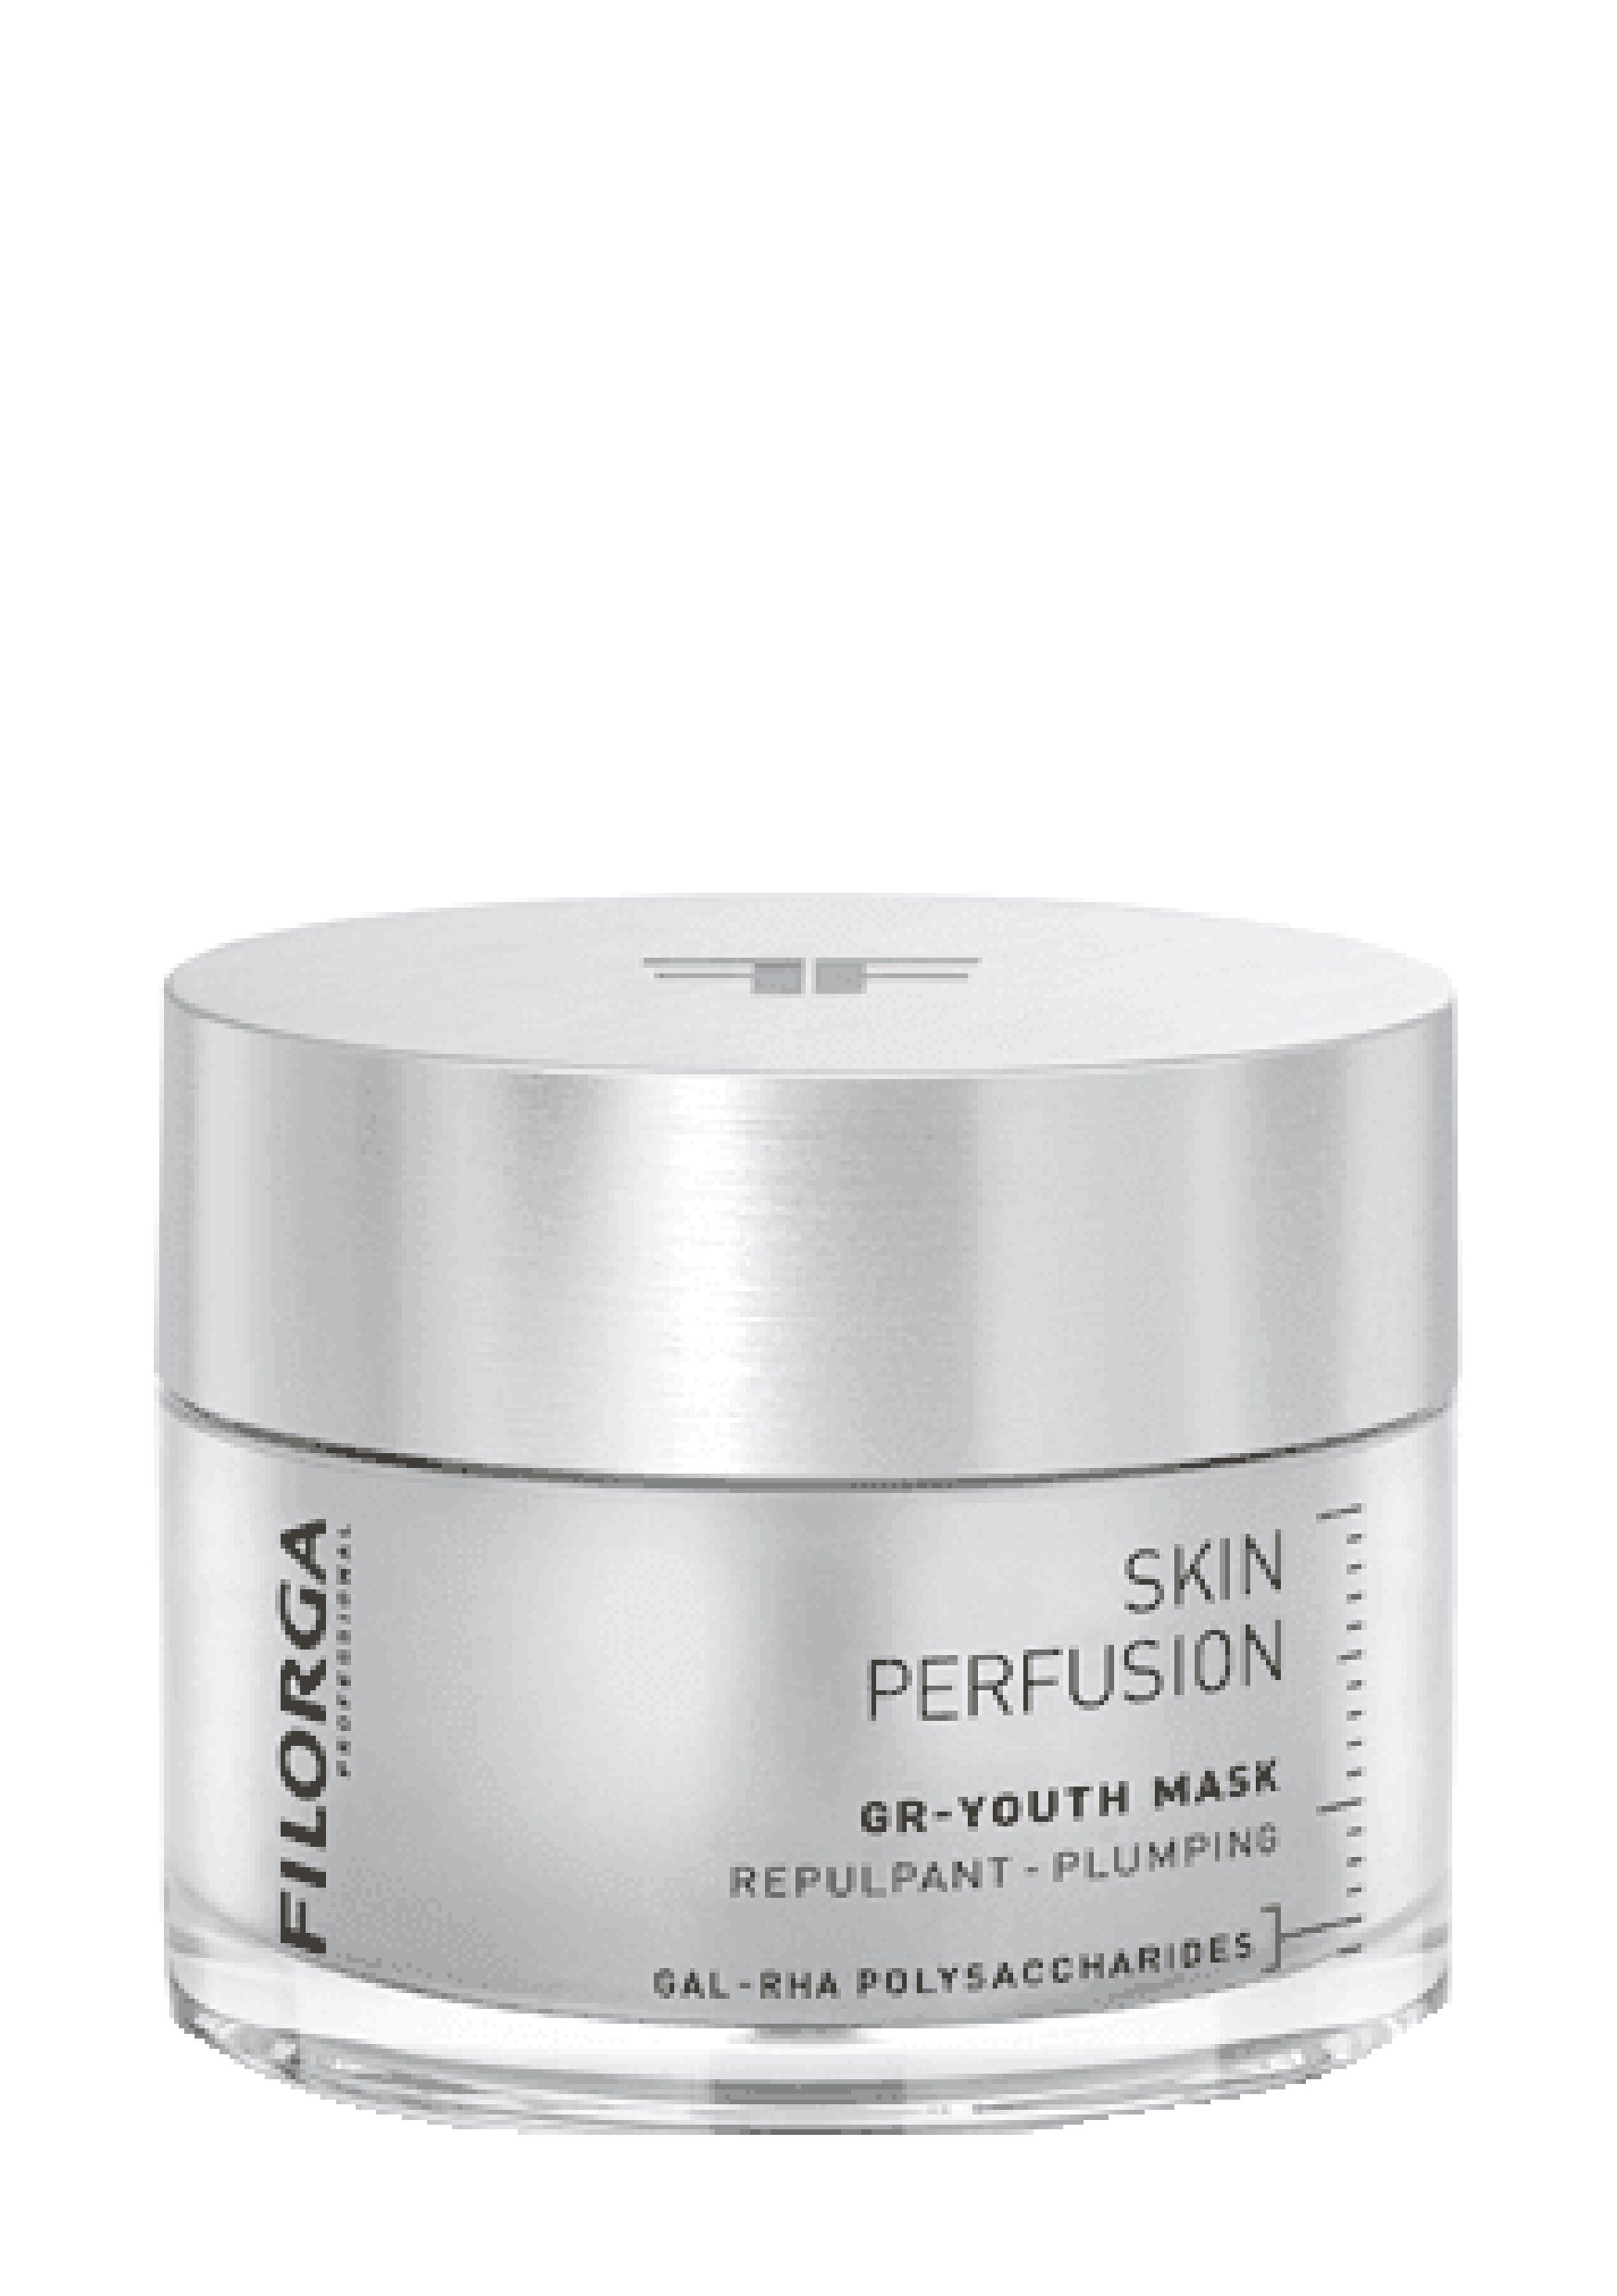 Skin Perfusion GR-Youth Mask